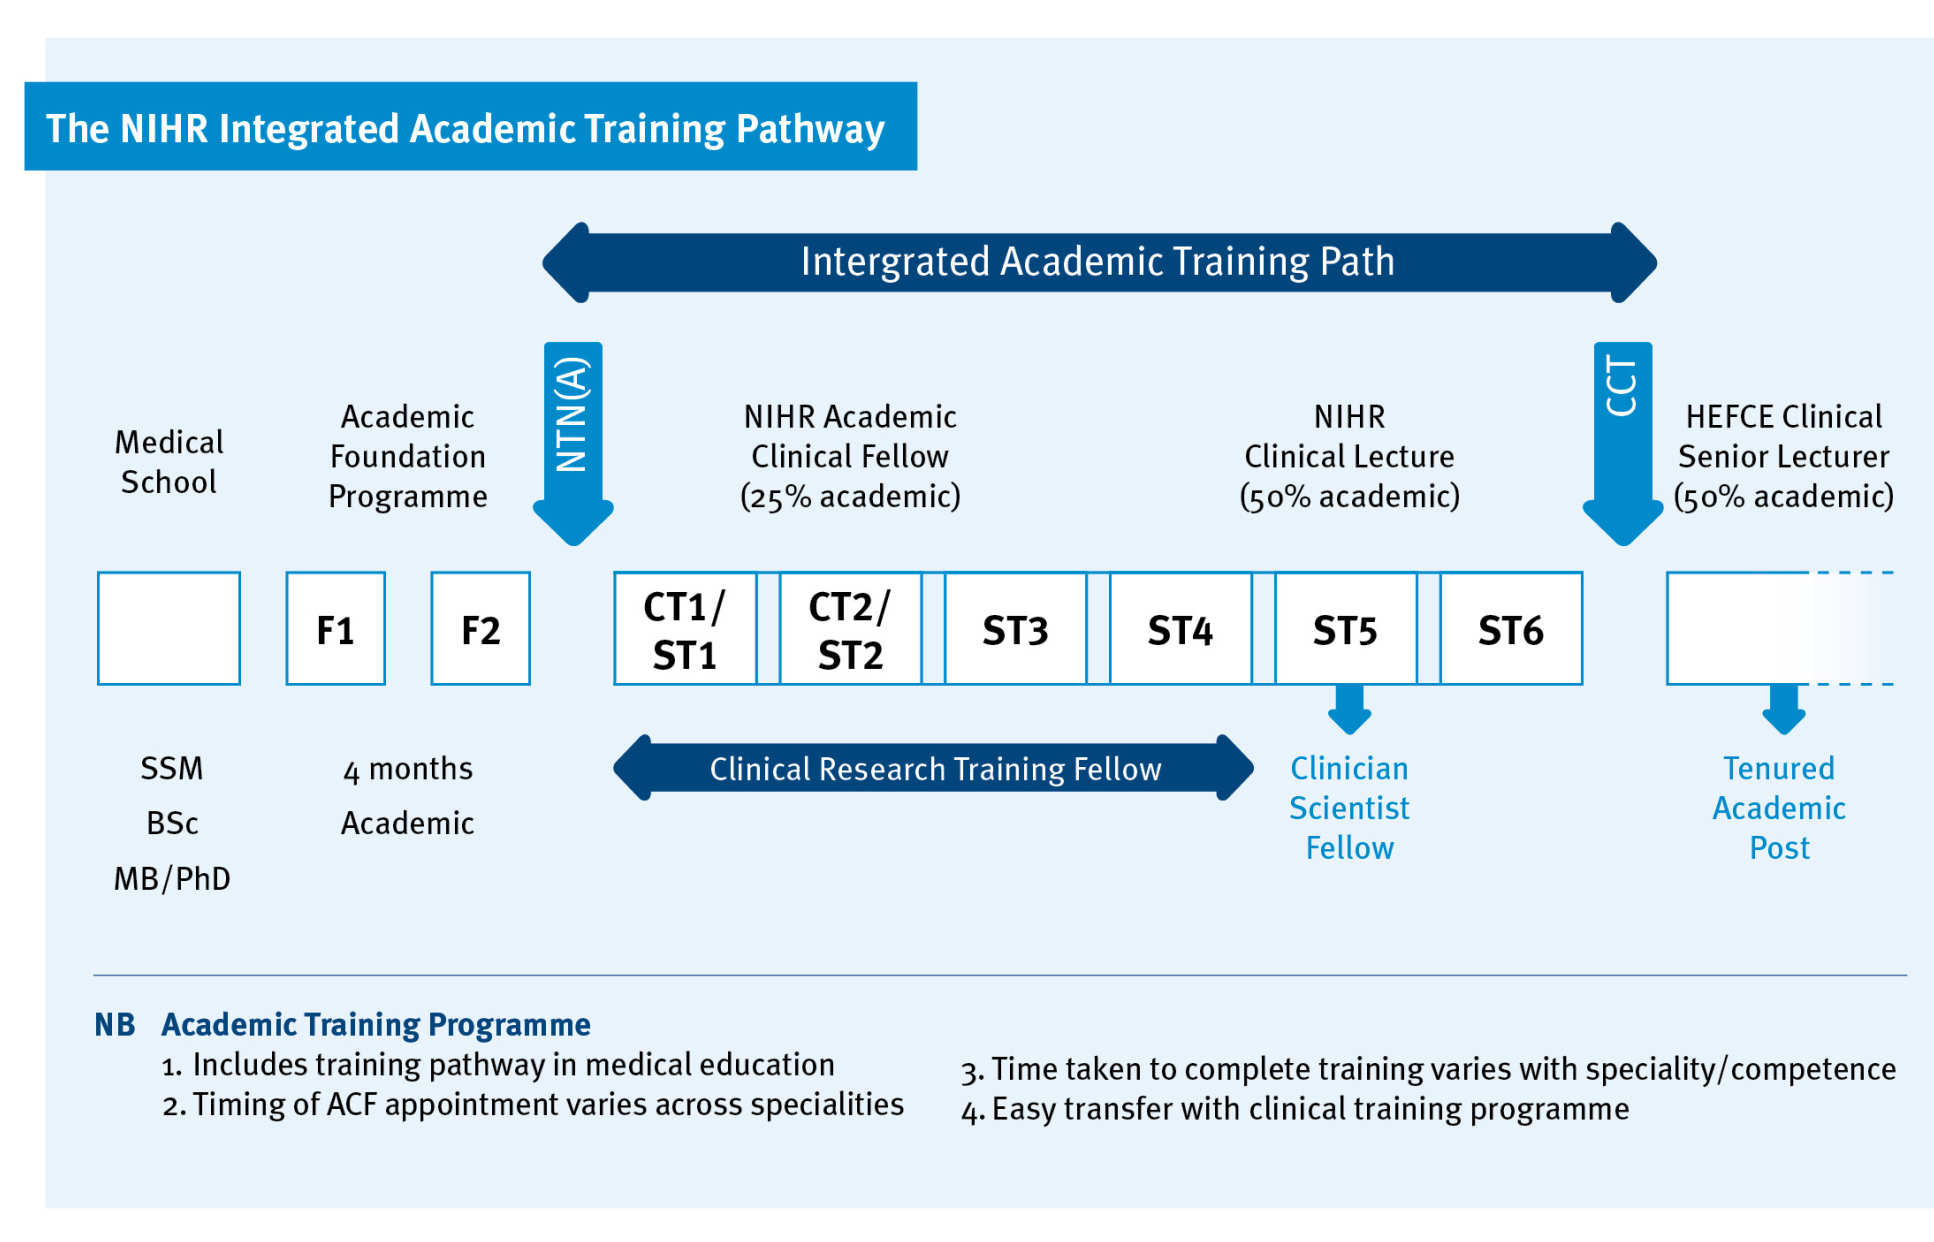 NIHR Integrated Academic Training Pathway